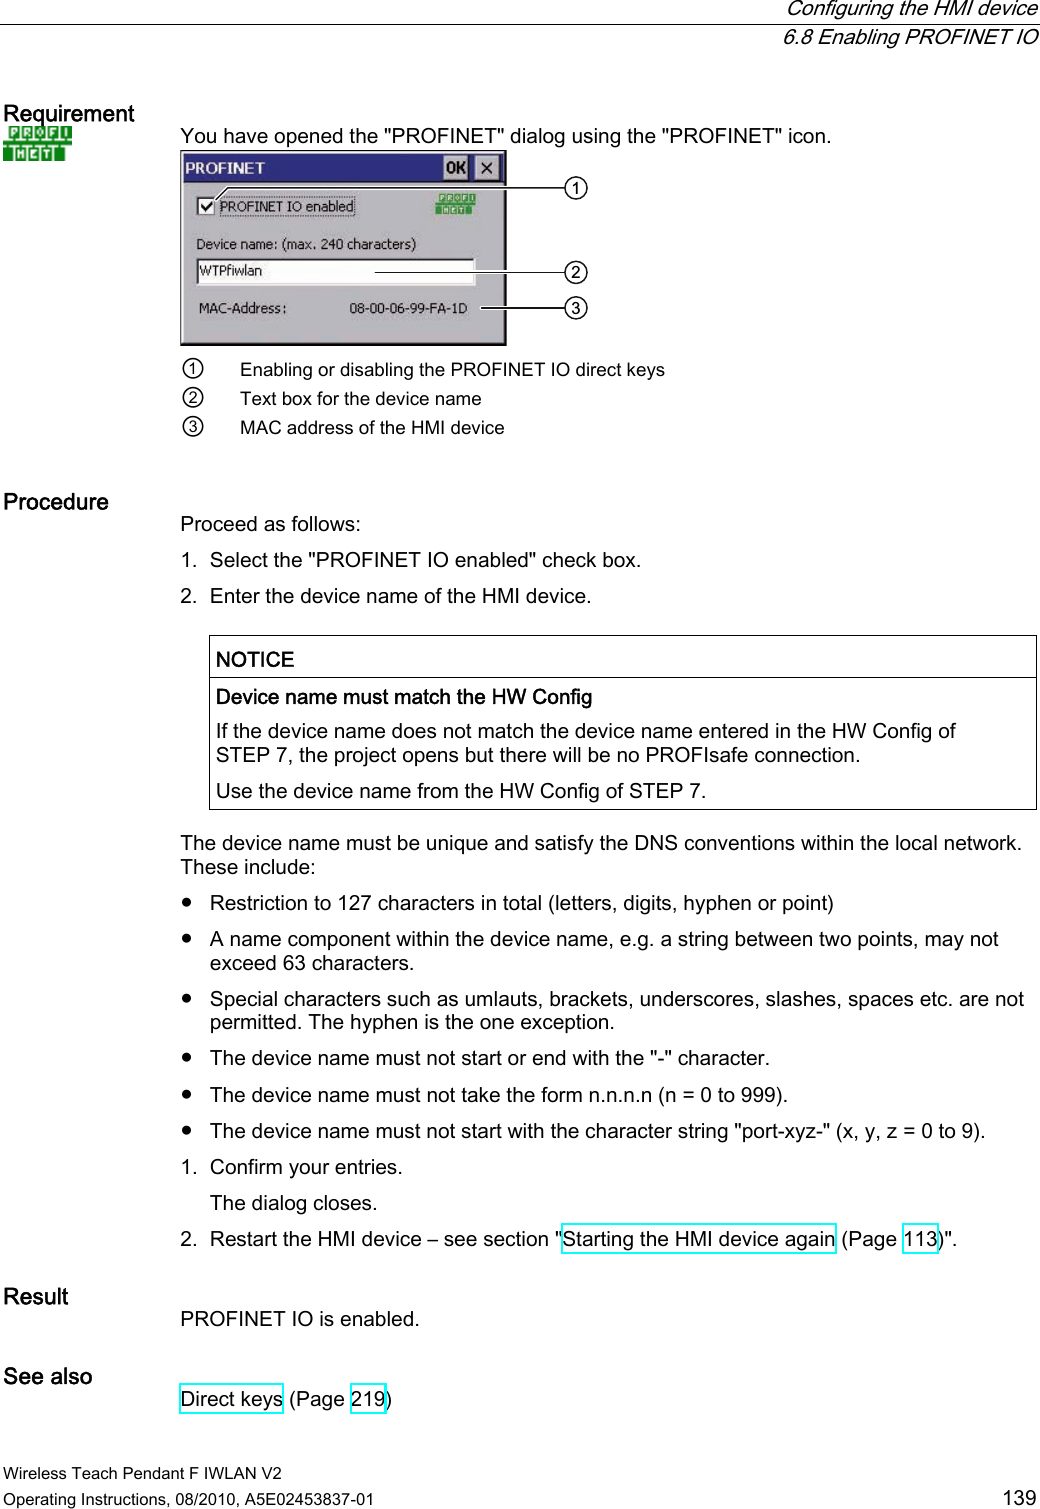  Configuring the HMI device  6.8 Enabling PROFINET IO Wireless Teach Pendant F IWLAN V2 Operating Instructions, 08/2010, A5E02453837-01  139 Requirement   You have opened the &quot;PROFINET&quot; dialog using the &quot;PROFINET&quot; icon.  ①  Enabling or disabling the PROFINET IO direct keys ②  Text box for the device name ③  MAC address of the HMI device  Procedure  Proceed as follows: 1. Select the &quot;PROFINET IO enabled&quot; check box. 2. Enter the device name of the HMI device.  NOTICE   Device name must match the HW Config If the device name does not match the device name entered in the HW Config of STEP 7, the project opens but there will be no PROFIsafe connection. Use the device name from the HW Config of STEP 7.  The device name must be unique and satisfy the DNS conventions within the local network. These include: ●  Restriction to 127 characters in total (letters, digits, hyphen or point) ●  A name component within the device name, e.g. a string between two points, may not exceed 63 characters. ●  Special characters such as umlauts, brackets, underscores, slashes, spaces etc. are not permitted. The hyphen is the one exception. ●  The device name must not start or end with the &quot;-&quot; character. ●  The device name must not take the form n.n.n.n (n = 0 to 999). ●  The device name must not start with the character string &quot;port-xyz-&quot; (x, y, z = 0 to 9). 1. Confirm your entries. The dialog closes. 2. Restart the HMI device – see section &quot;Starting the HMI device again (Page 113)&quot;. Result  PROFINET IO is enabled. See also  Direct keys (Page 219) PRELIMINARY II 1.7.2010